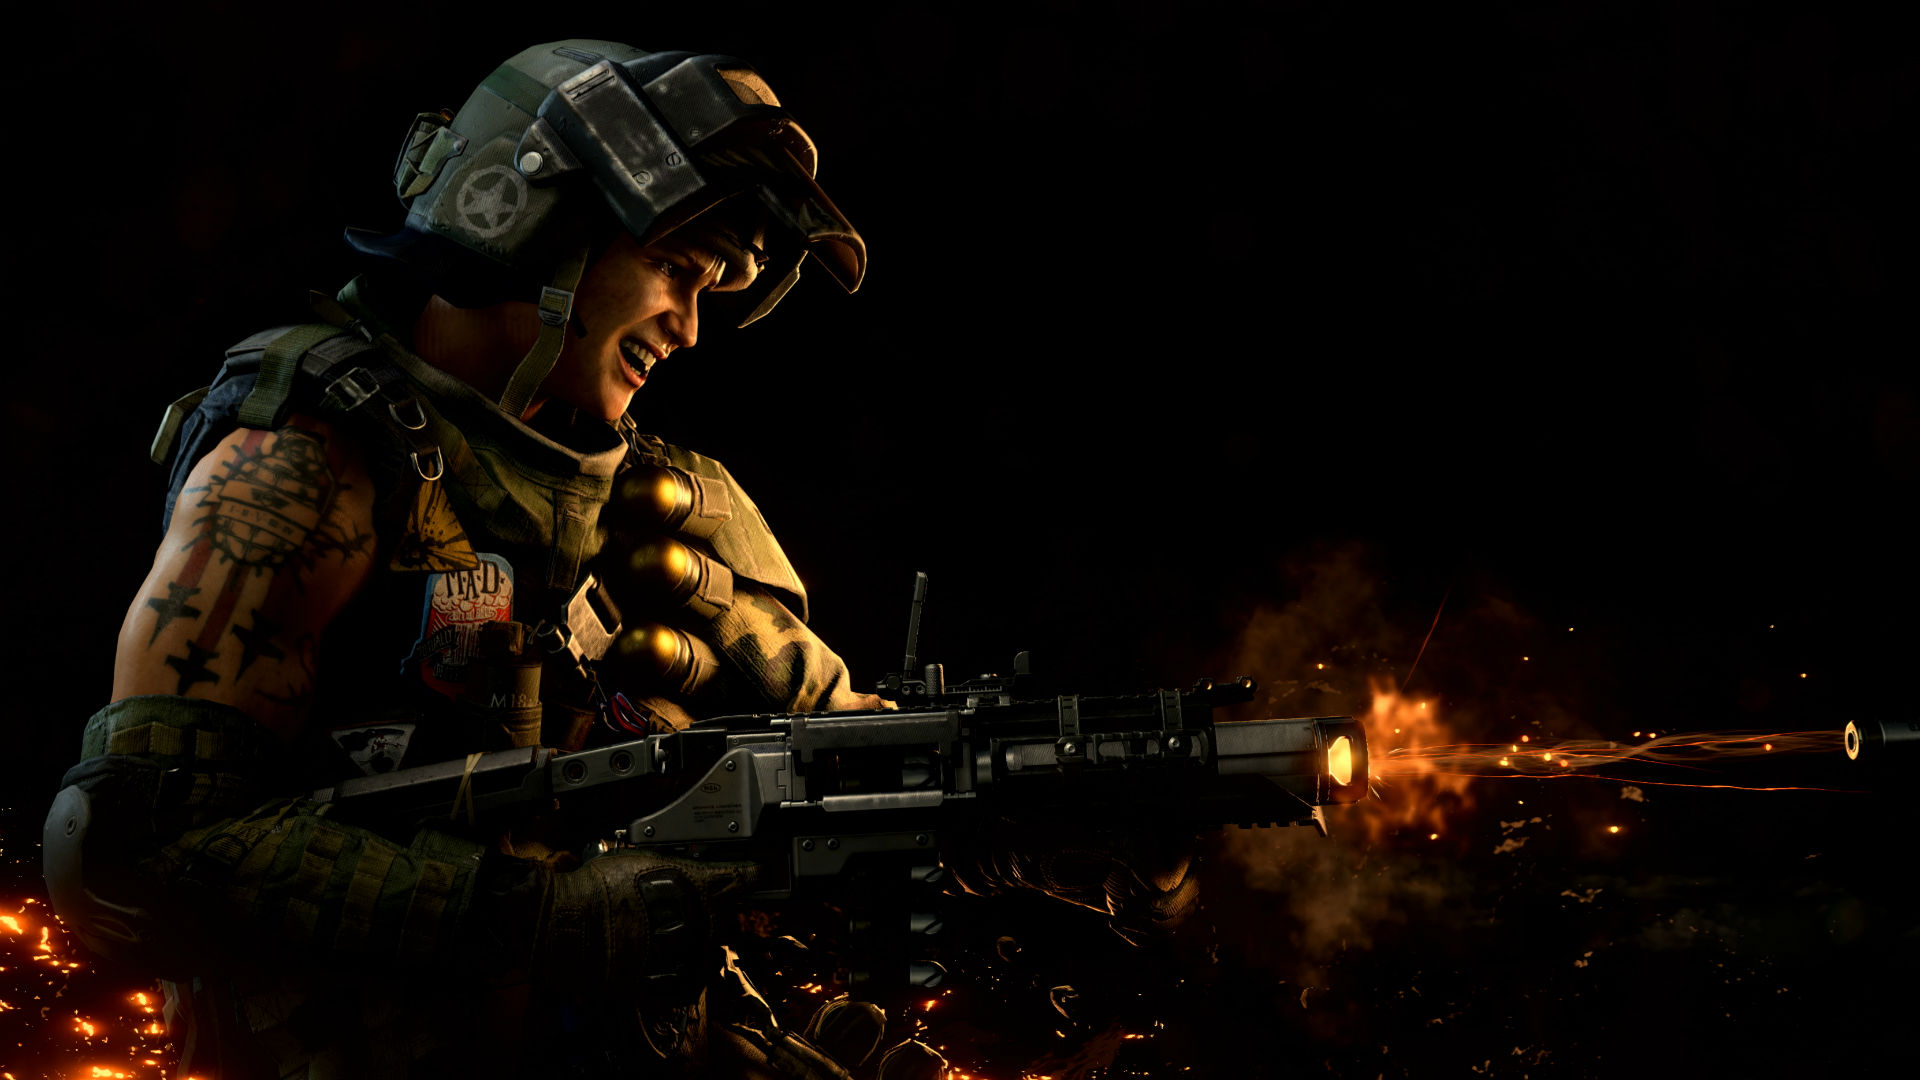 Call Of Duty Black Ops 4 Specialists Every Character And Their Abilities Revealed Pcgamesn